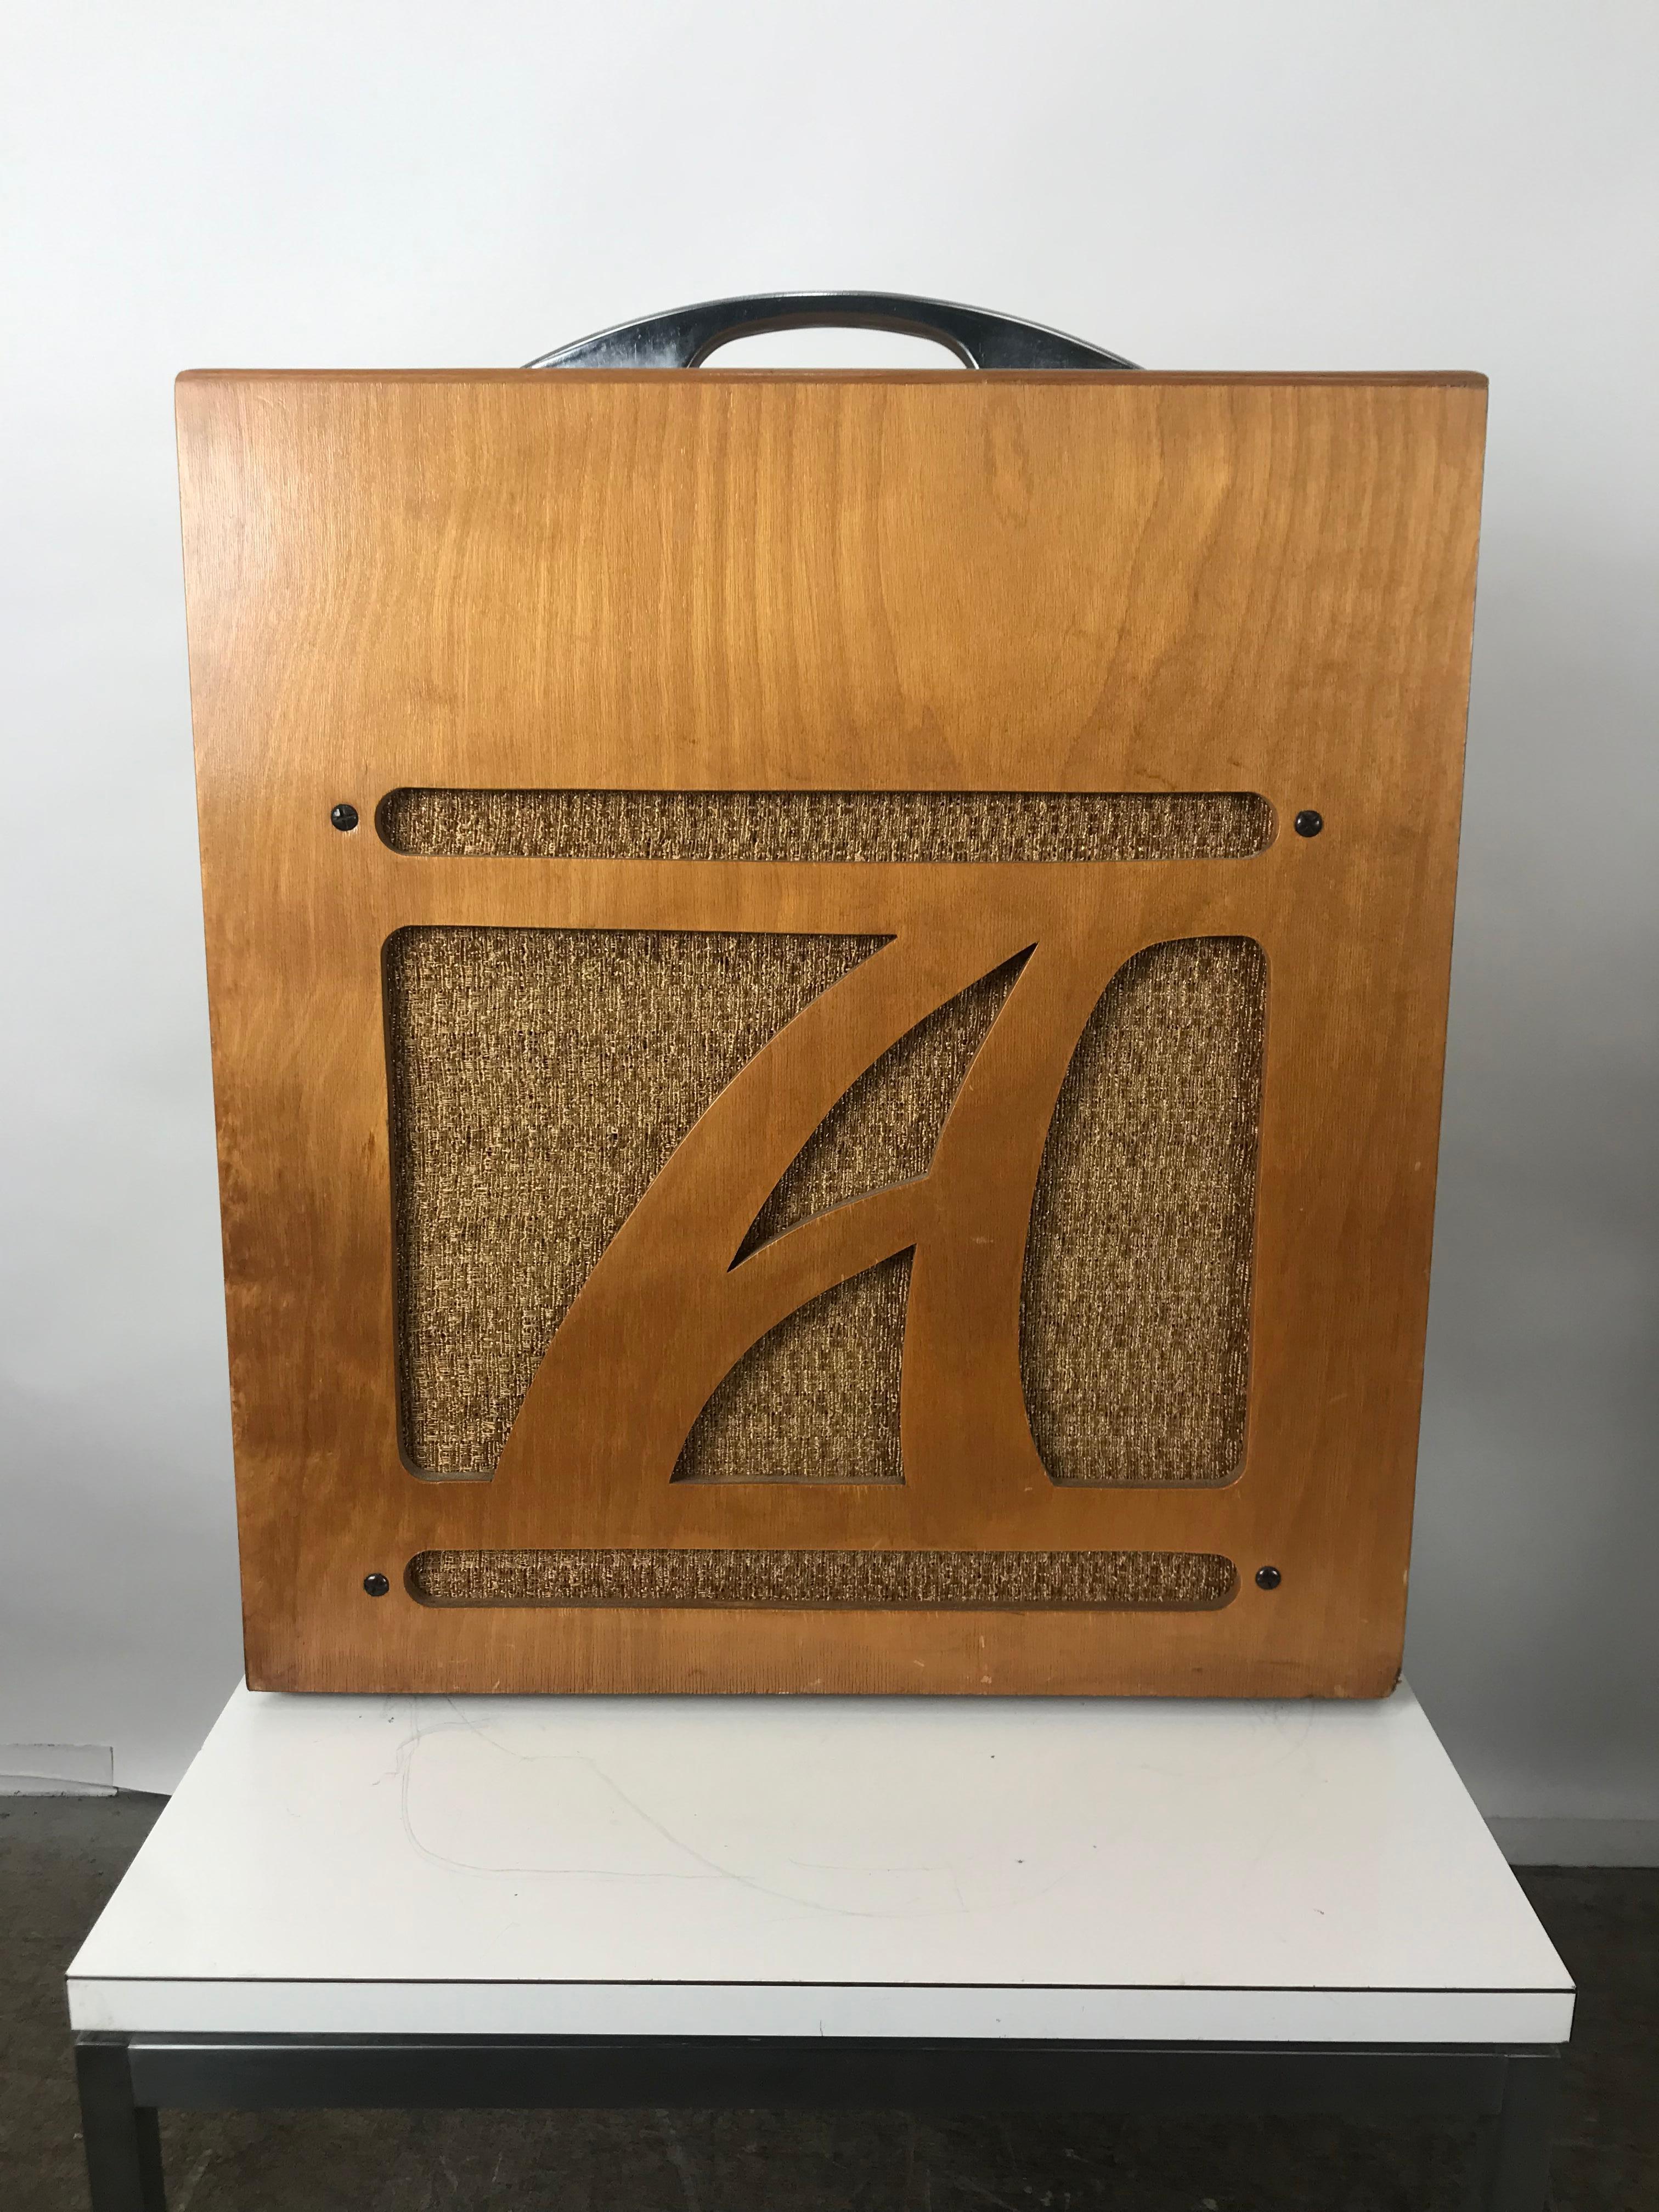 Extremely rare 1954 Alamo Electrical musical amplifier, model 6A, mint original showroom condition, retains original canvas cover, complete with operating instructions and warranty bond,

Alamo Model 6A from the 1950s. It had the original cloth